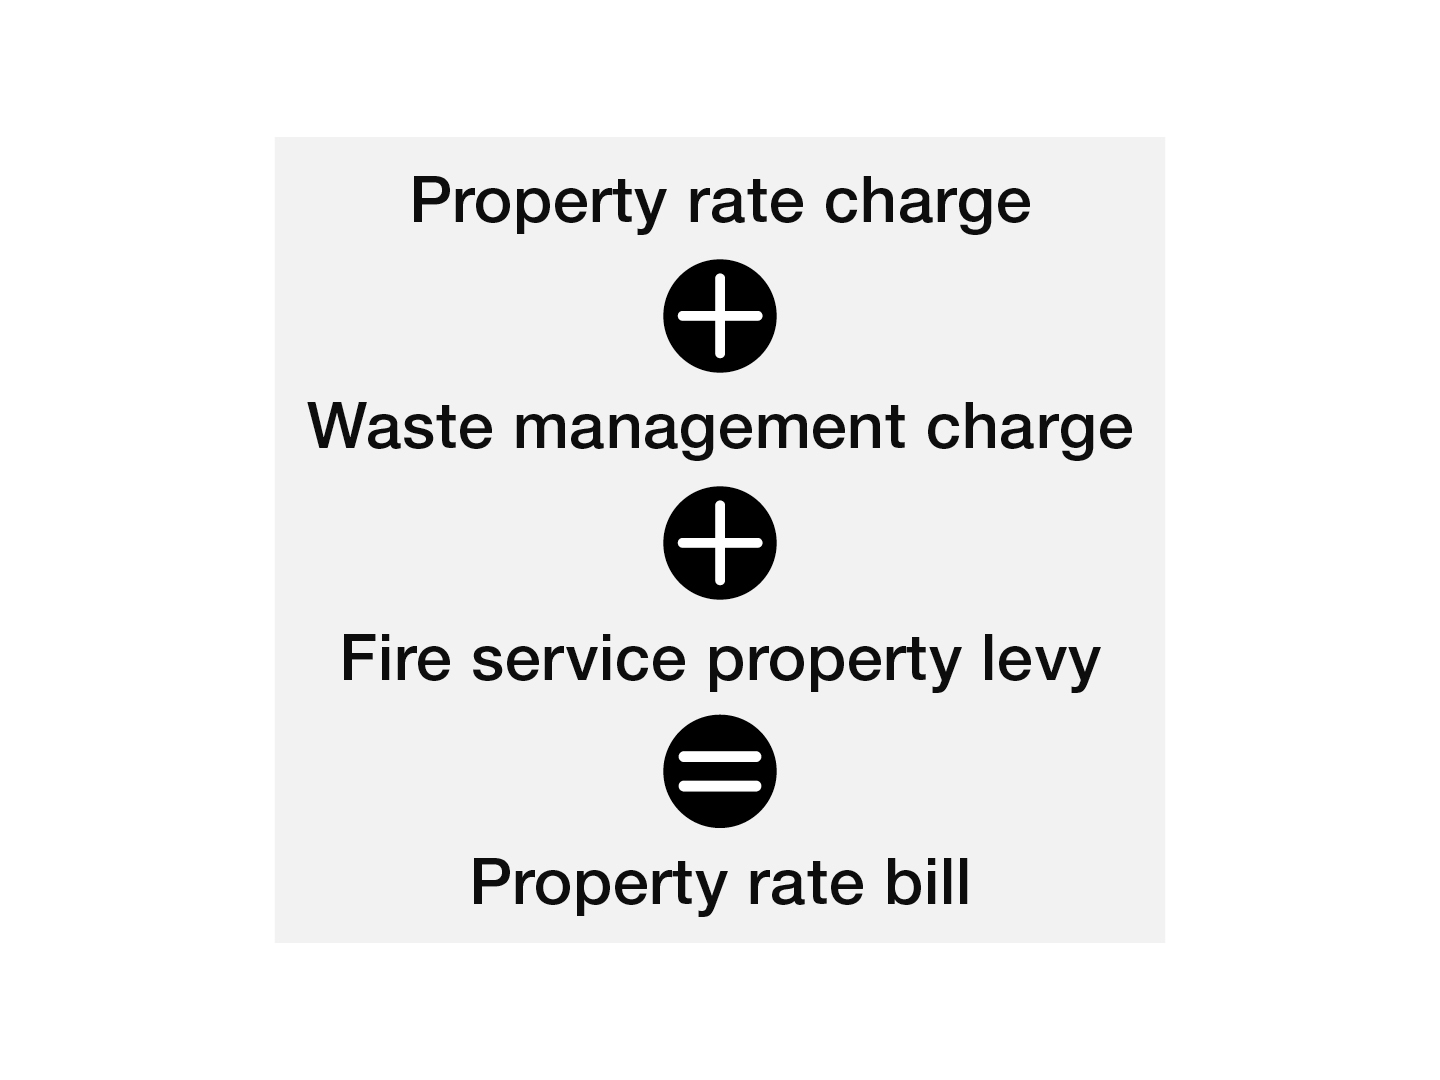 Property rate charge plus waste management charge plus fire service property levy equals the property rate bill